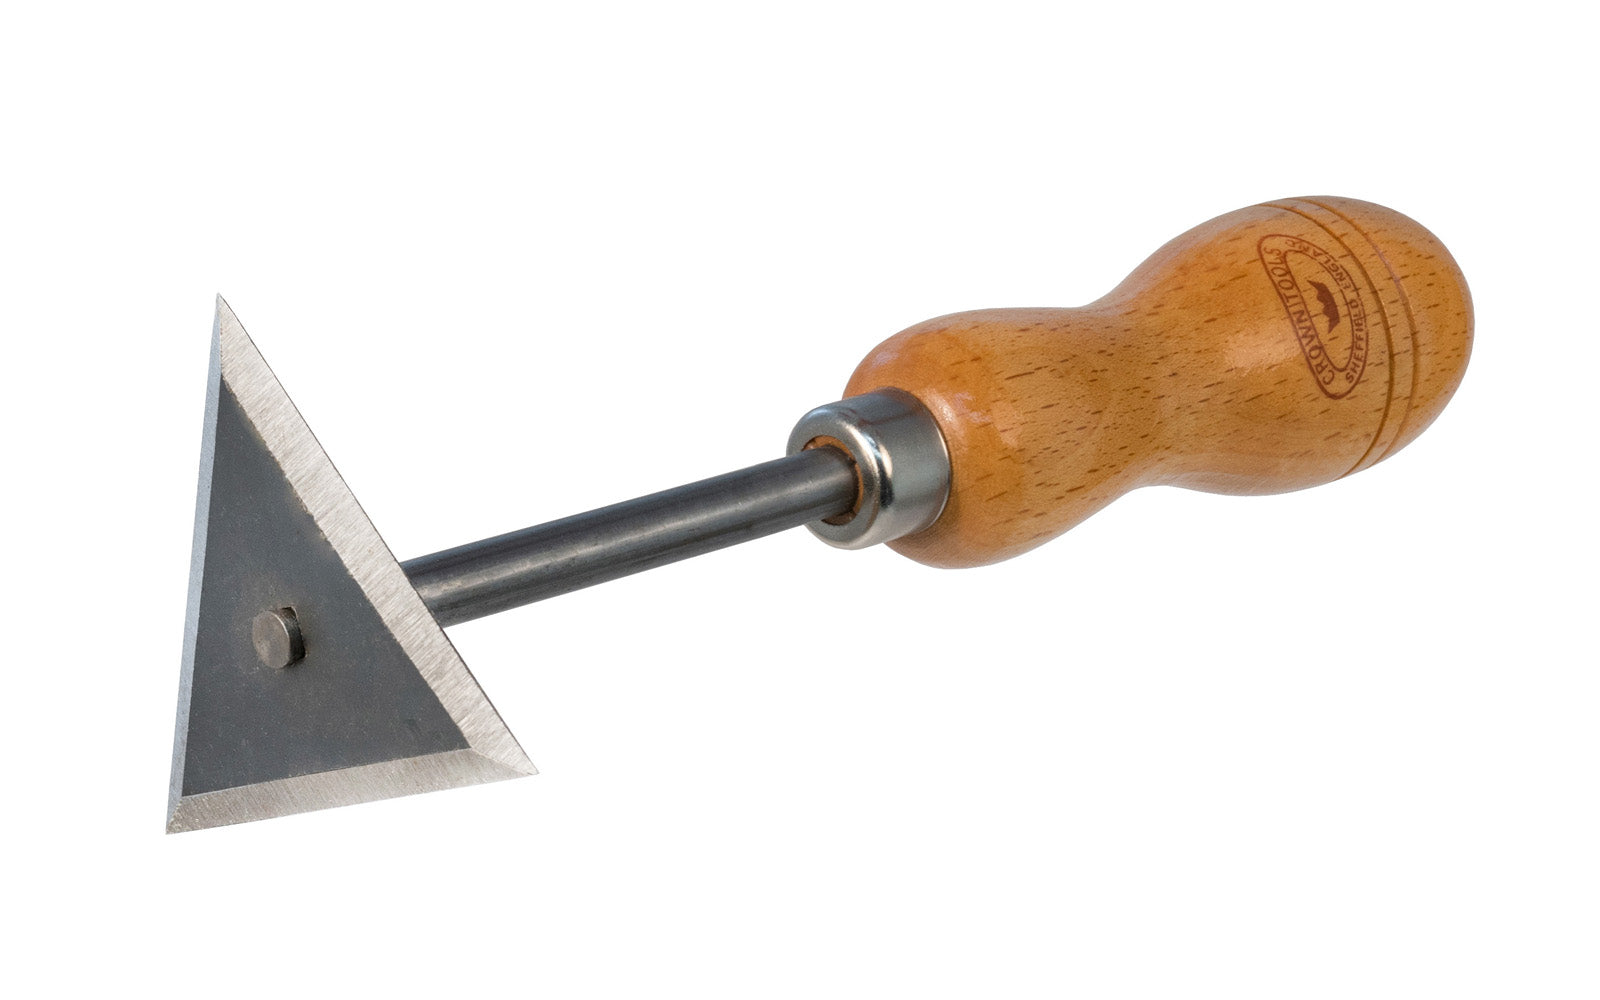 Crown Tools 7-1/2" Triangle Shave Hook. Model No. 330. The blade is made of carbon steel & is hardened & tempered. It is a great wood scraper for general woodworking & scraping purposes. Lacquered Beech handle. Made in Sheffield, England.